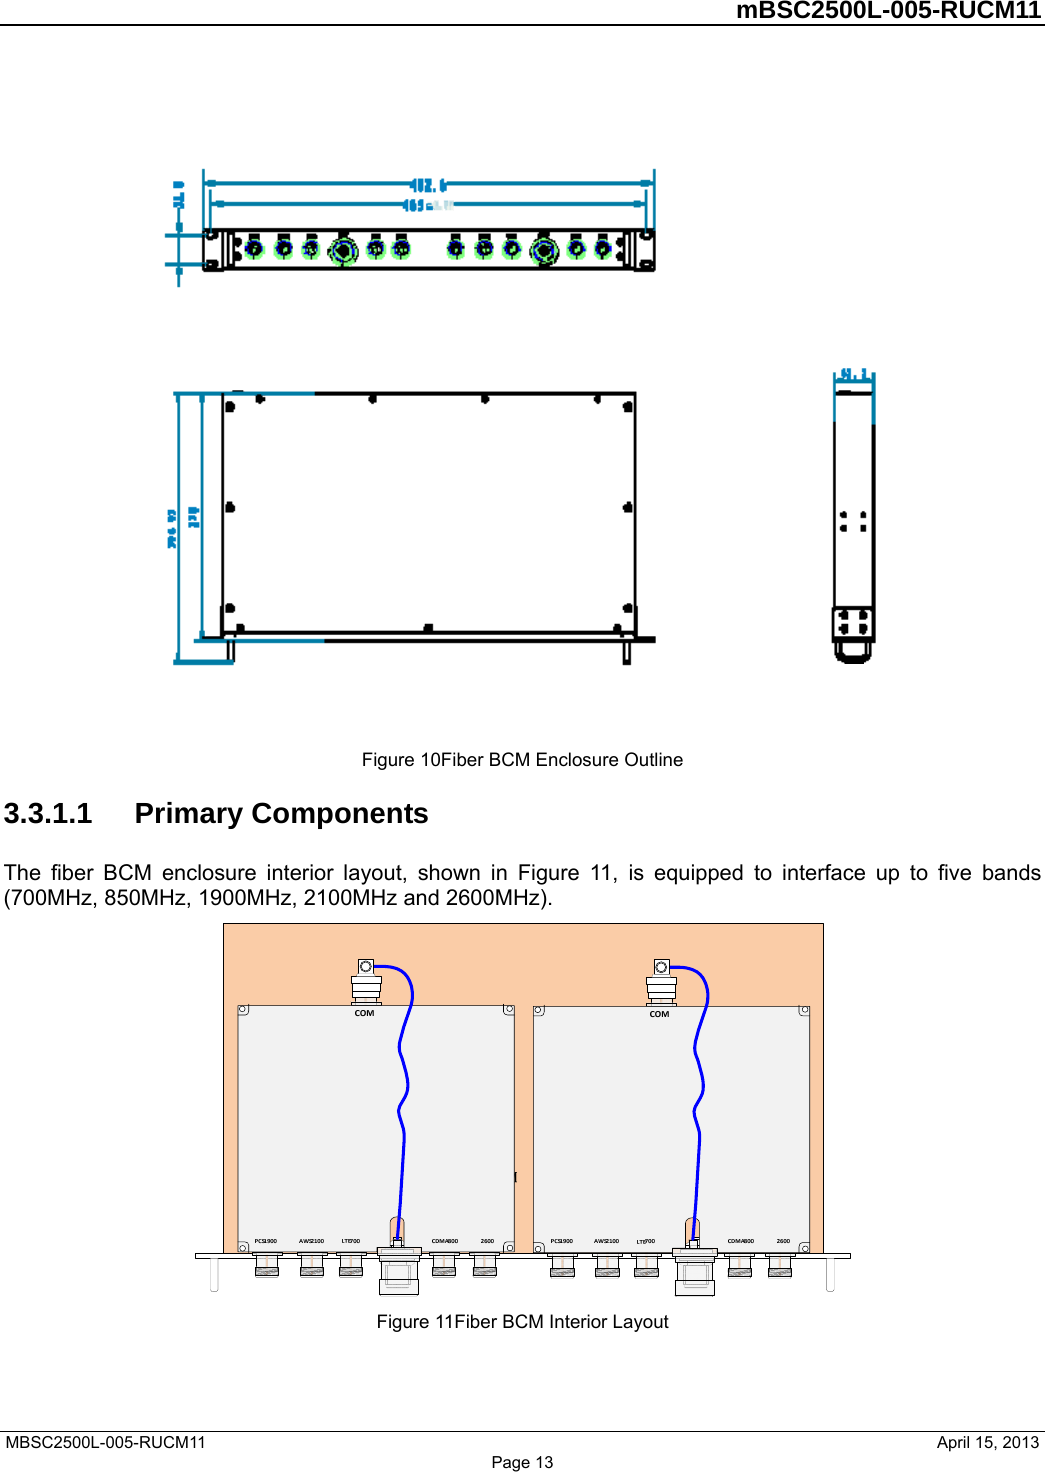         mBSC2500L-005-RUCM11   MBSC2500L-005-RUCM11                                April 15, 2013 Page 13   Figure 10Fiber BCM Enclosure Outline 3.3.1.1  Primary Componentn Figure 11, is equipped to interface up to five bands s The fiber BCM enclosure interior layout, shown i(700MHz, 850MHz, 1900MHz, 2100MHz and 2600MHz).    Figure 11Fiber BCM Interior Layout 